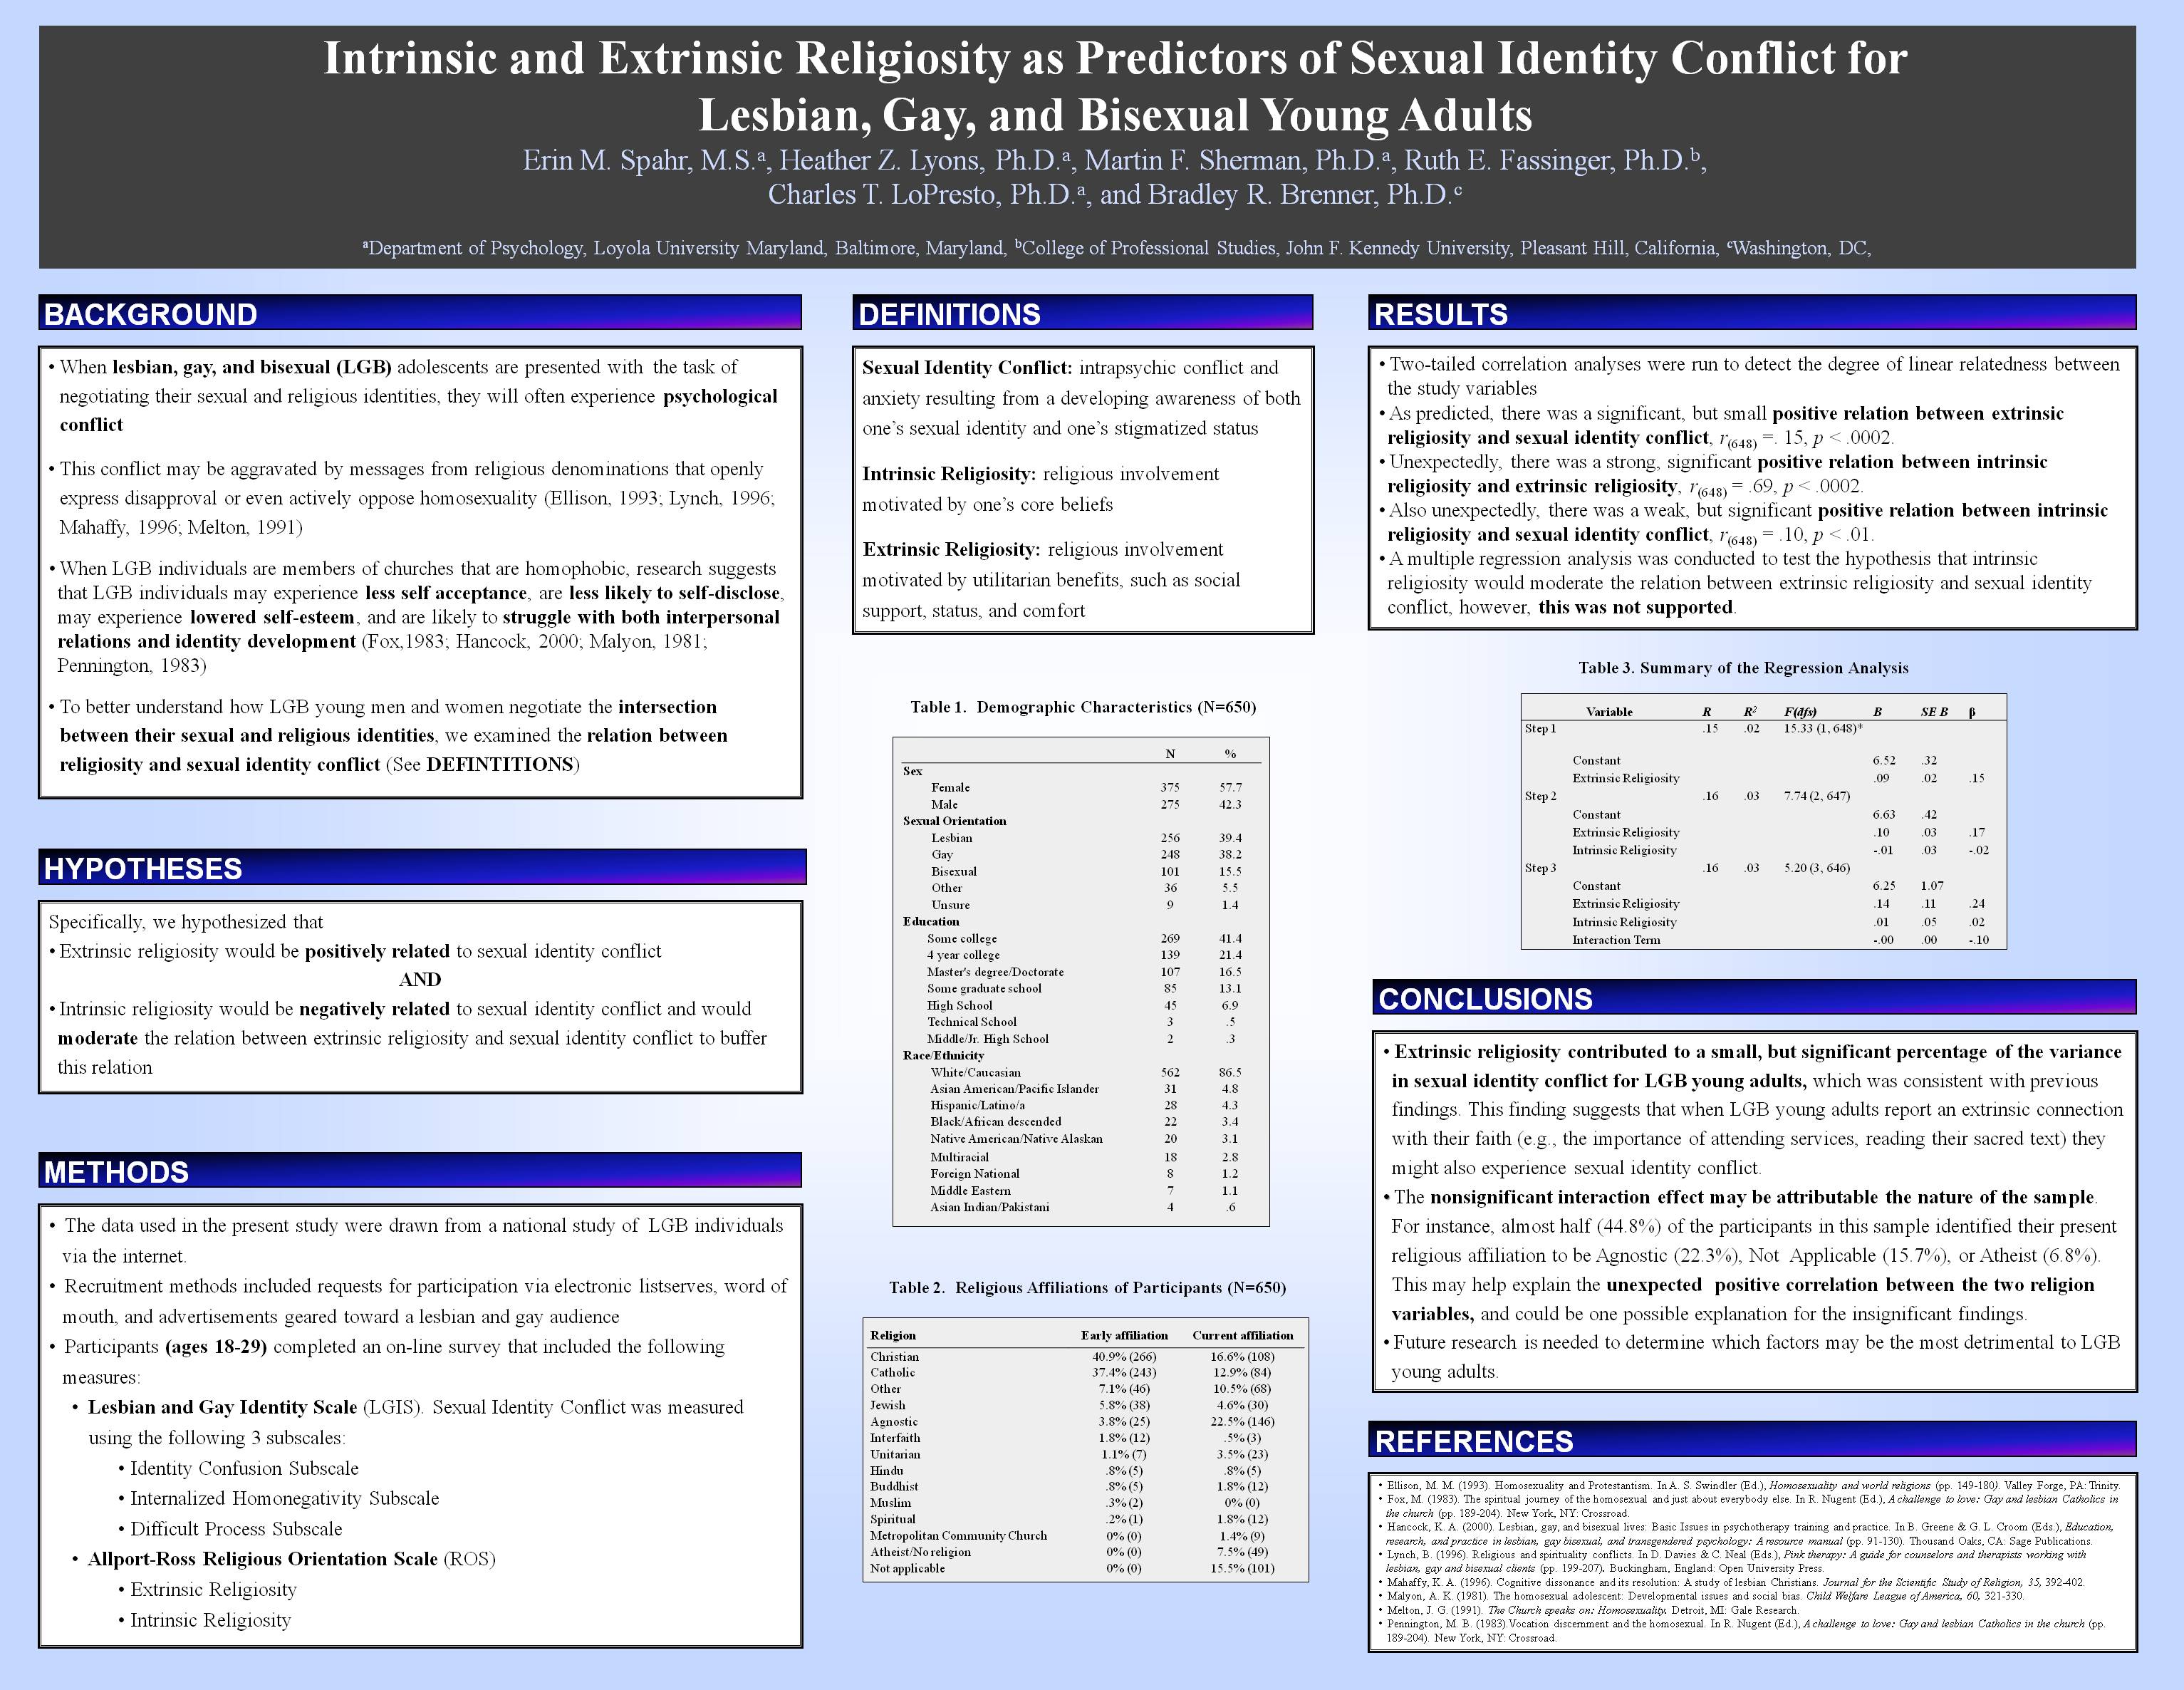 Poster image: Intrinsic and Extrinsic Religiosity as Predictors of Sexual Identity Conflict for Lesbian, Gay, and Bisexual Young Adults